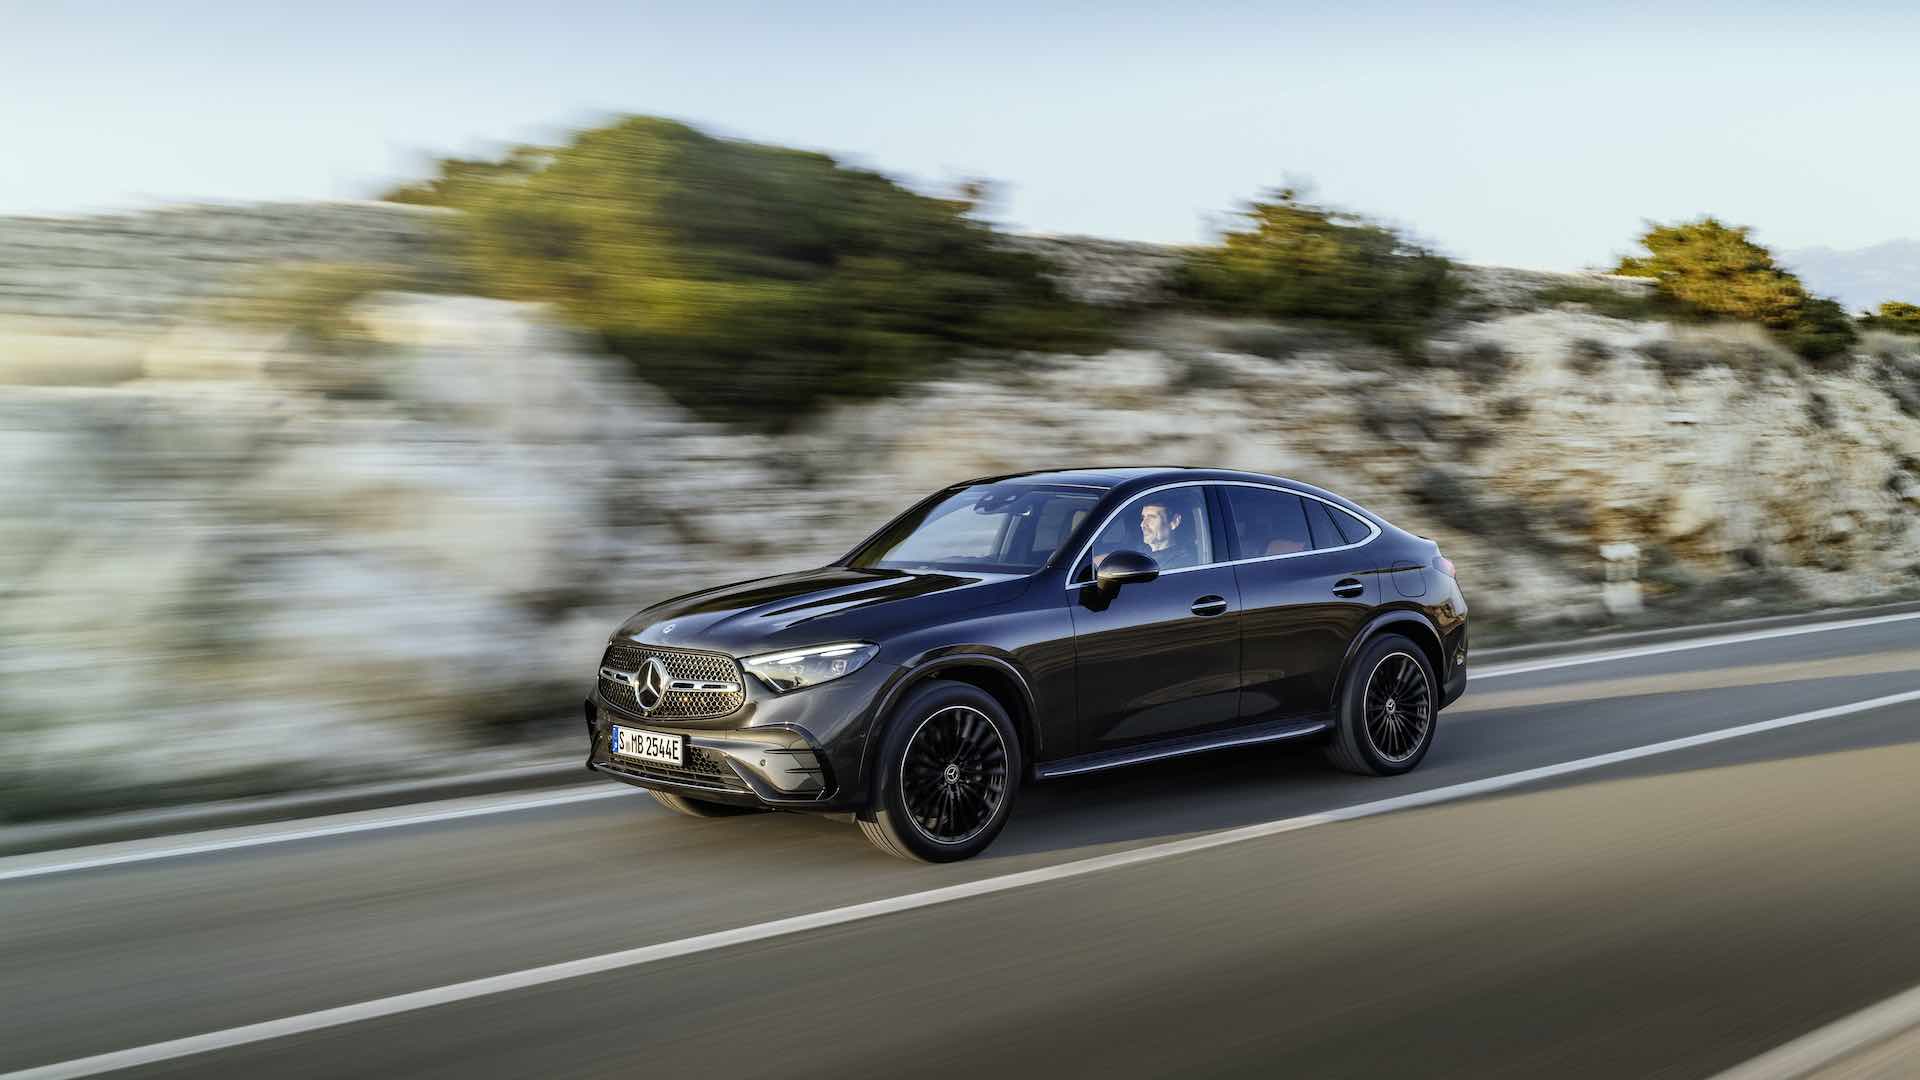 Mercedes-Benz launches GLC Coupe with electric off-road capabilities